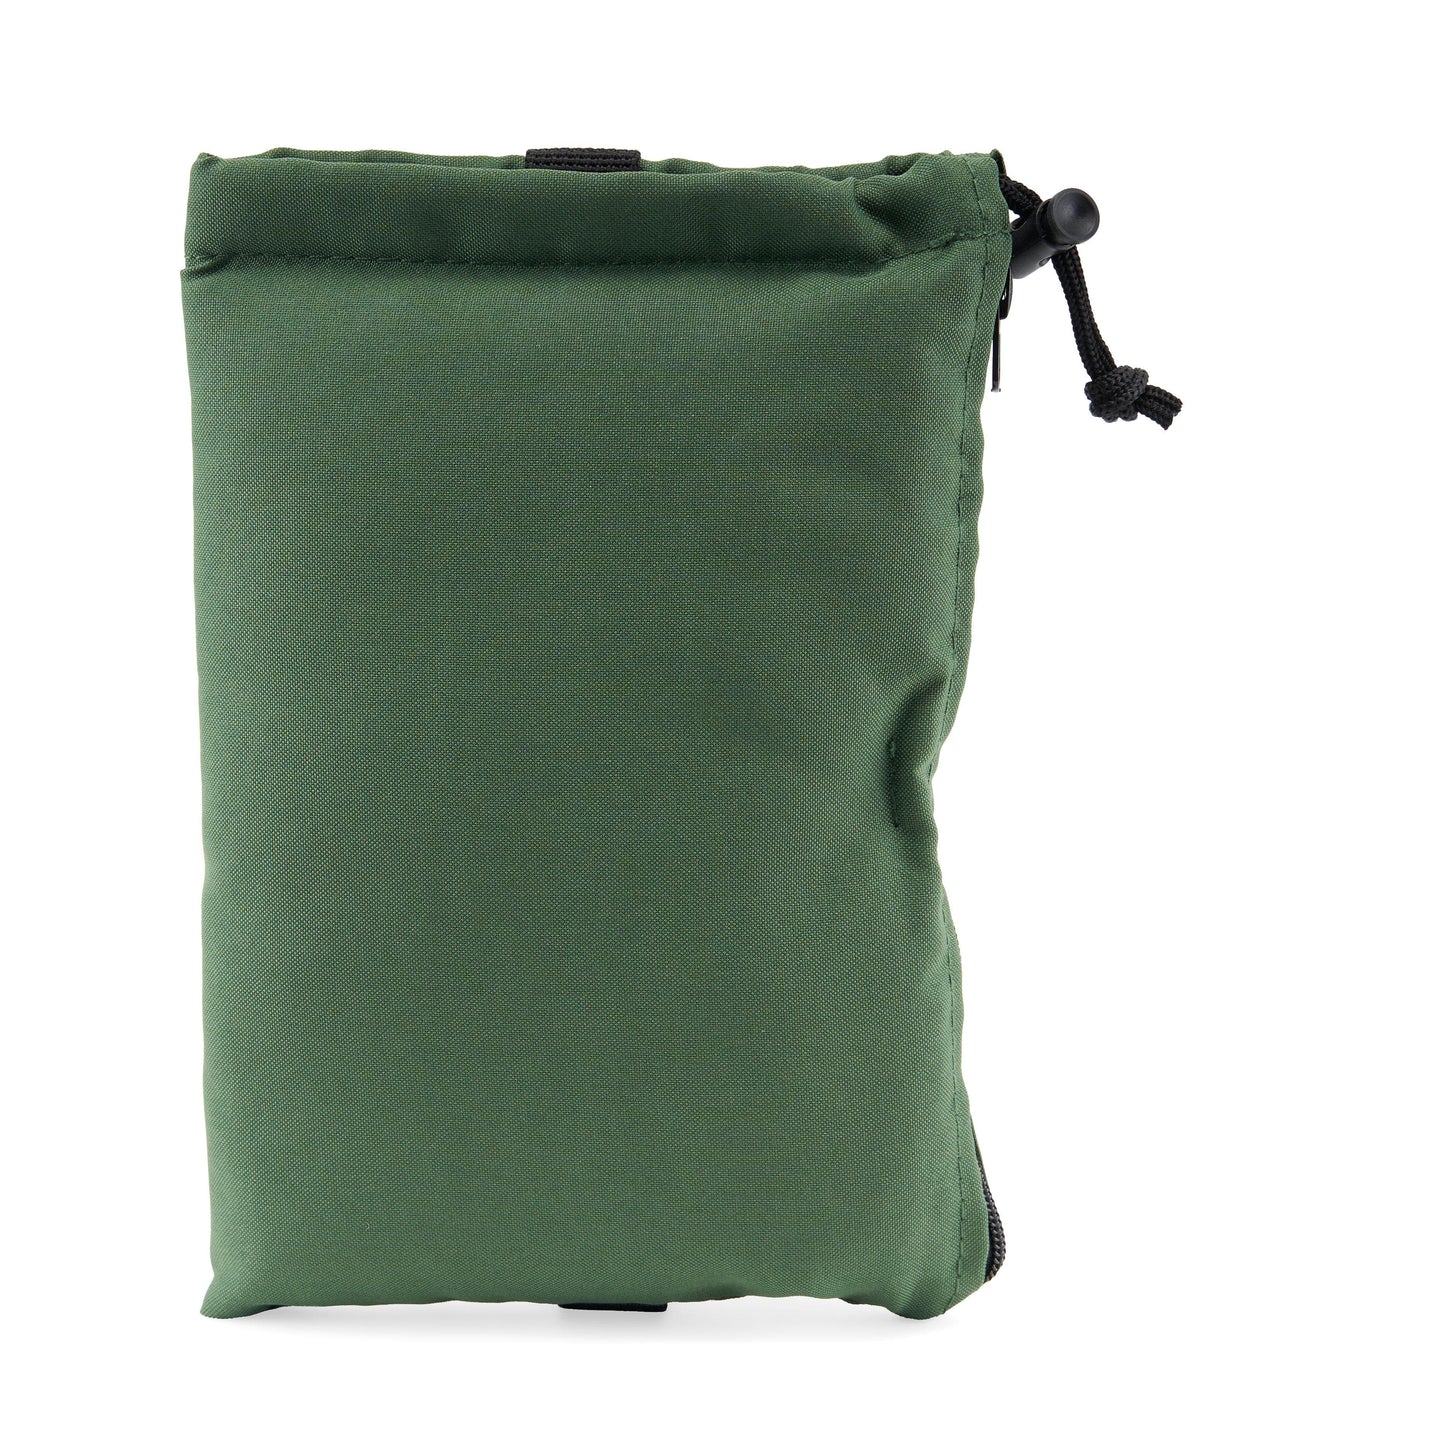 Glass Pillow Travel Bag Green 11" Storage Pouch with Zipper and Drawstring